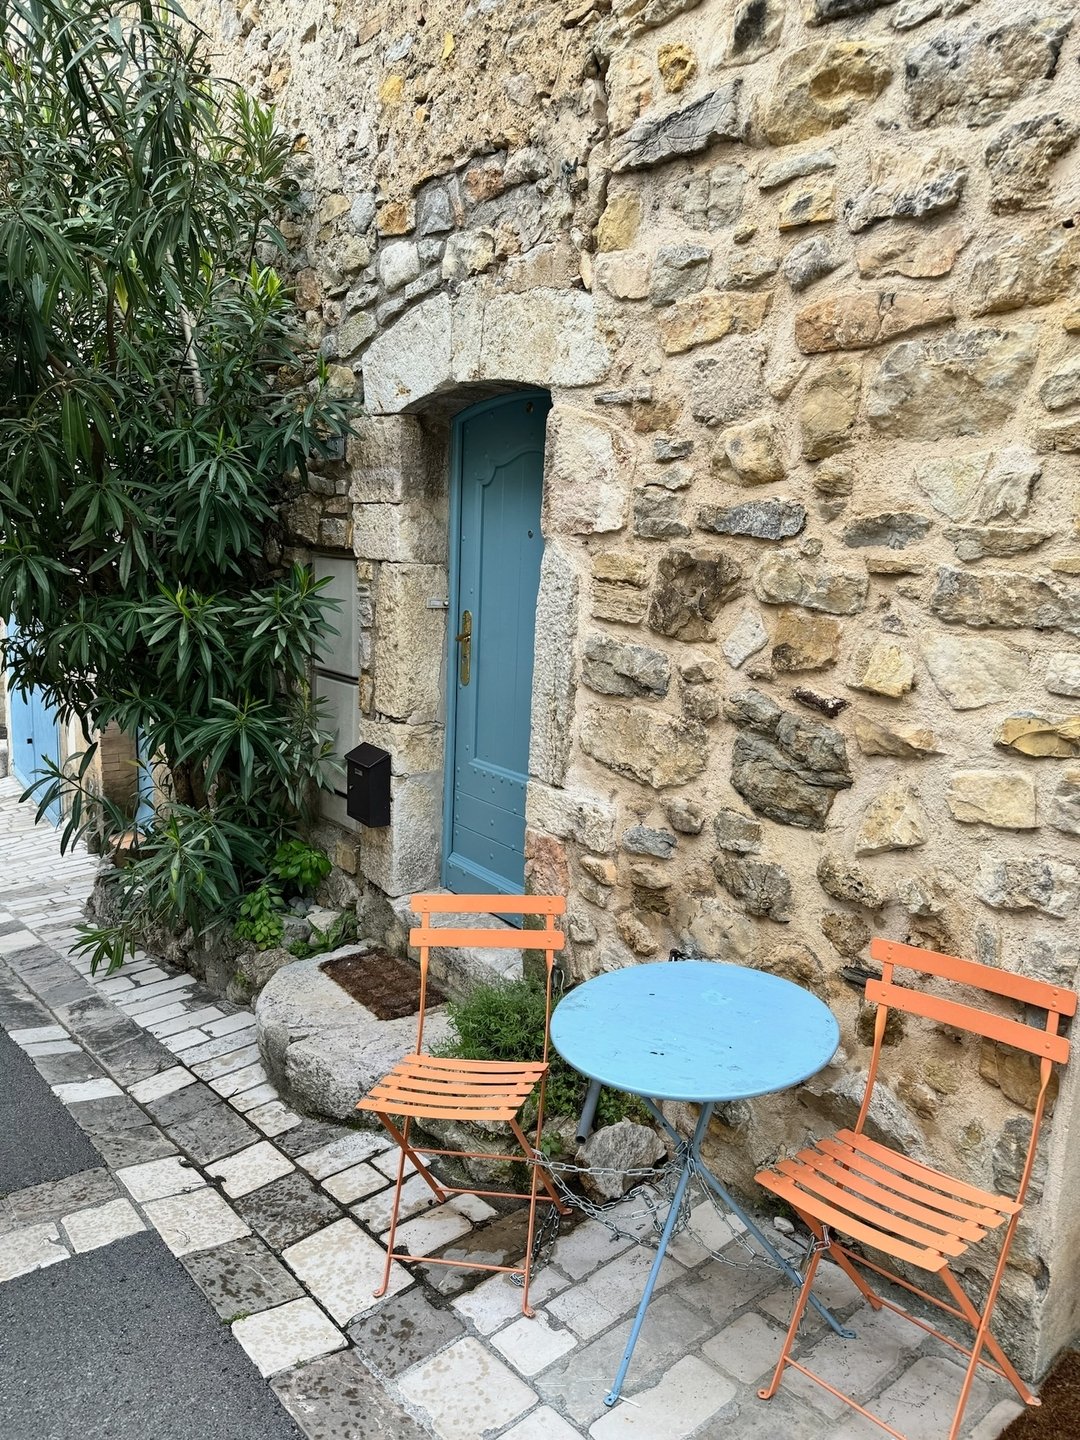 Everyone needs an outdoor perch for a pretty Spring day. This one in Valbonne, France made me happy!

#exvotovintage #exvoto #apparel #jewelry #brand #timeless #inspiration #femalefounded #ethicallysourced #dresses #tops #pants #shorts #accessories #